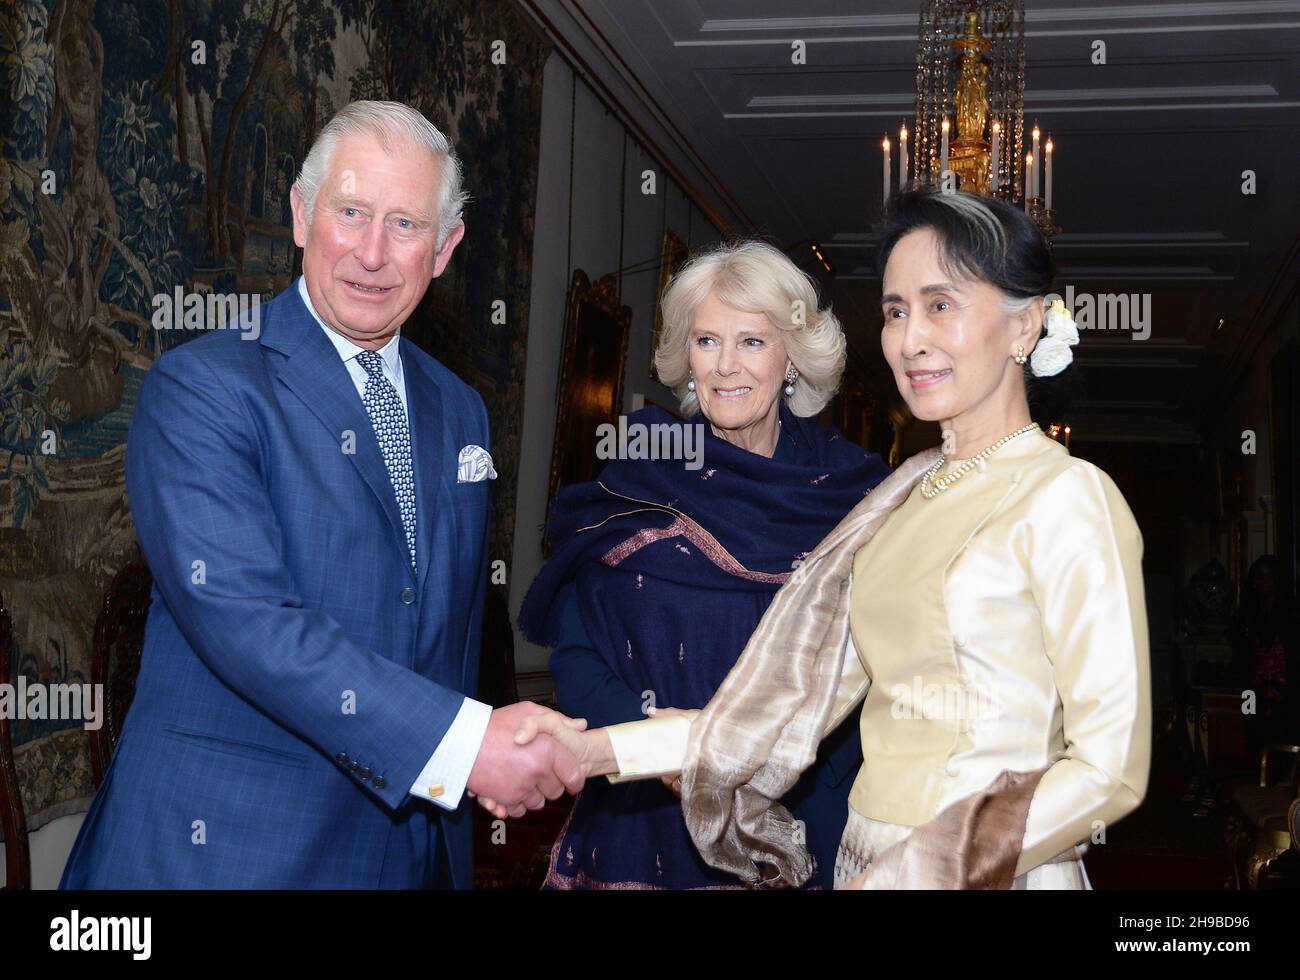 File photo dated 5/5/2017 of the Prince of Wales and the Duchess of Cornwall greet Burma's then de facto leader Aung San Suu Kyi (right) ahead of their meeting at Clarence House in London. A court in Myanmar has sentenced the country's ousted leader, Aung San Suu Kyi, to four years in prison after finding her guilty of incitement and violating coronavirus restrictions, a legal official said. Issue date: Monday December 6, 2021. Stock Photo